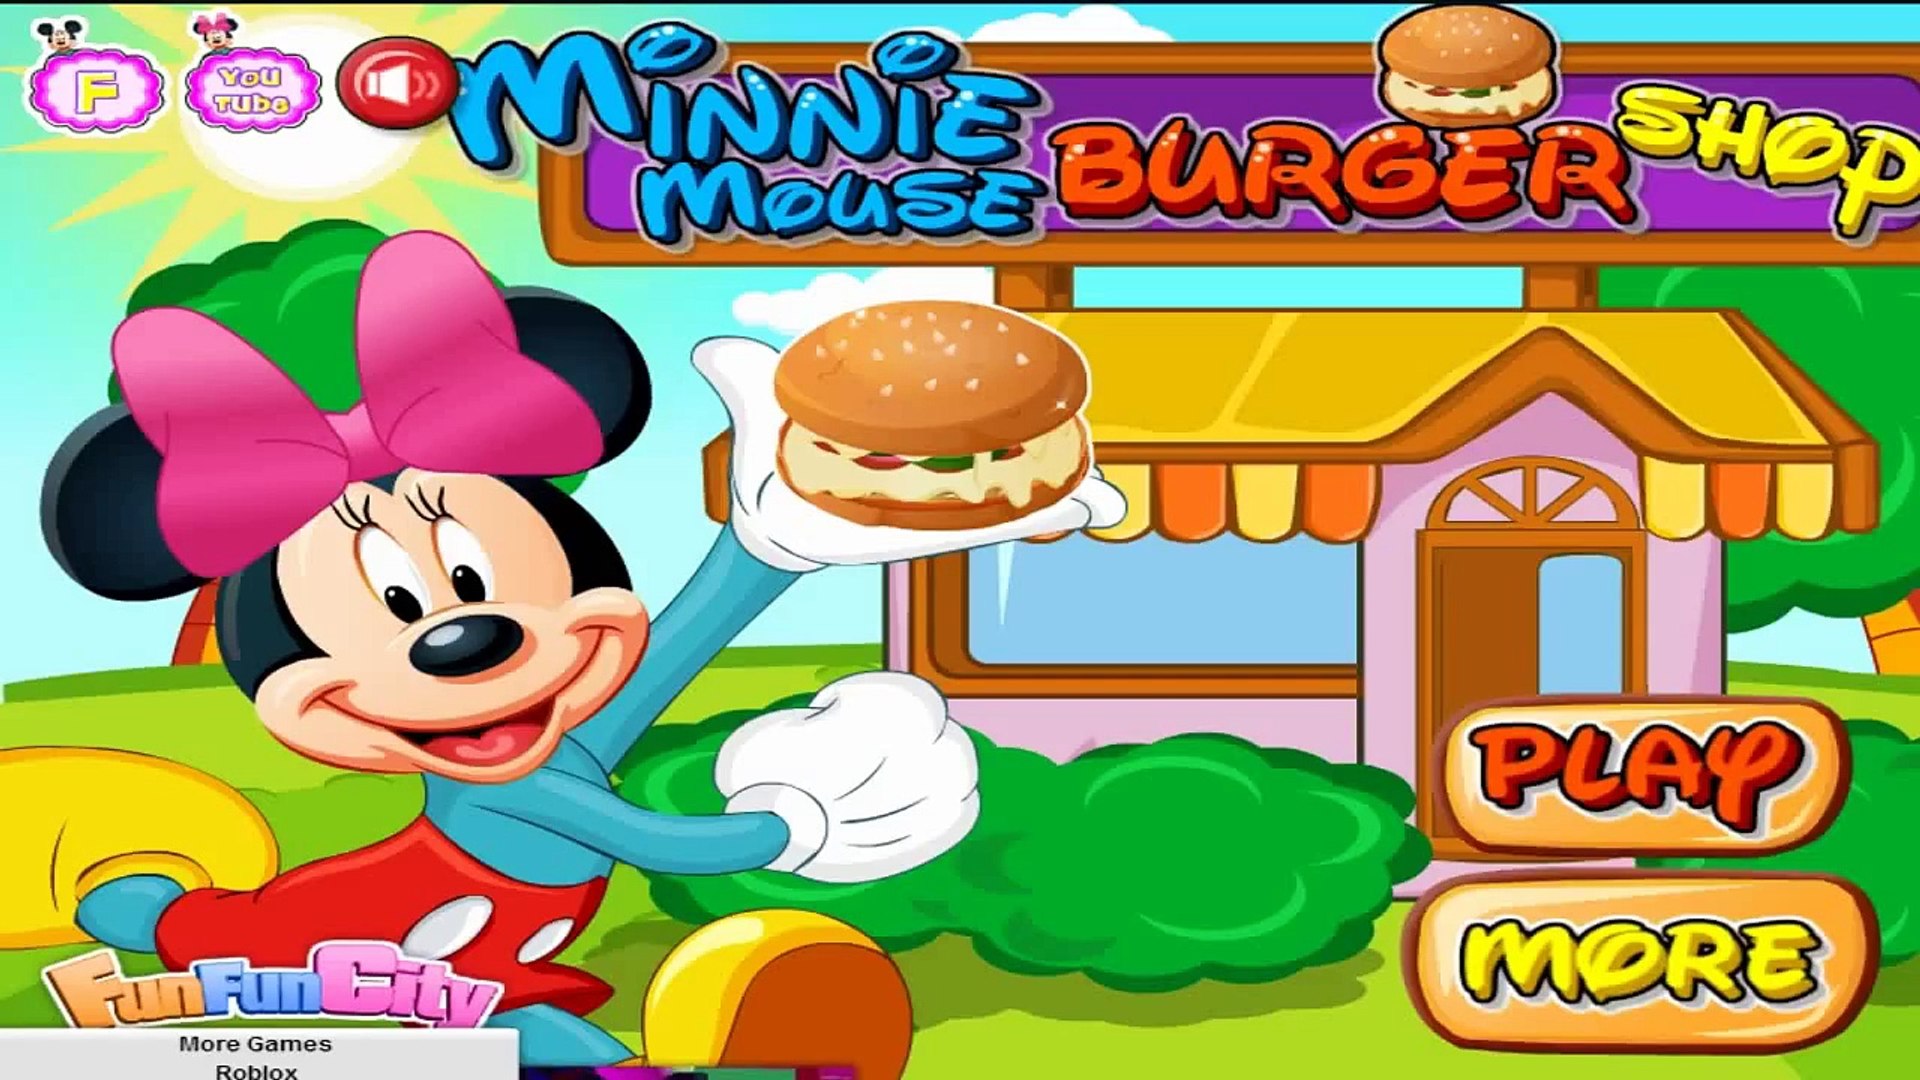 Minnie Mouse Burger Shop Cartoon Games For Kids - roblox mickey mouse clubhouse games